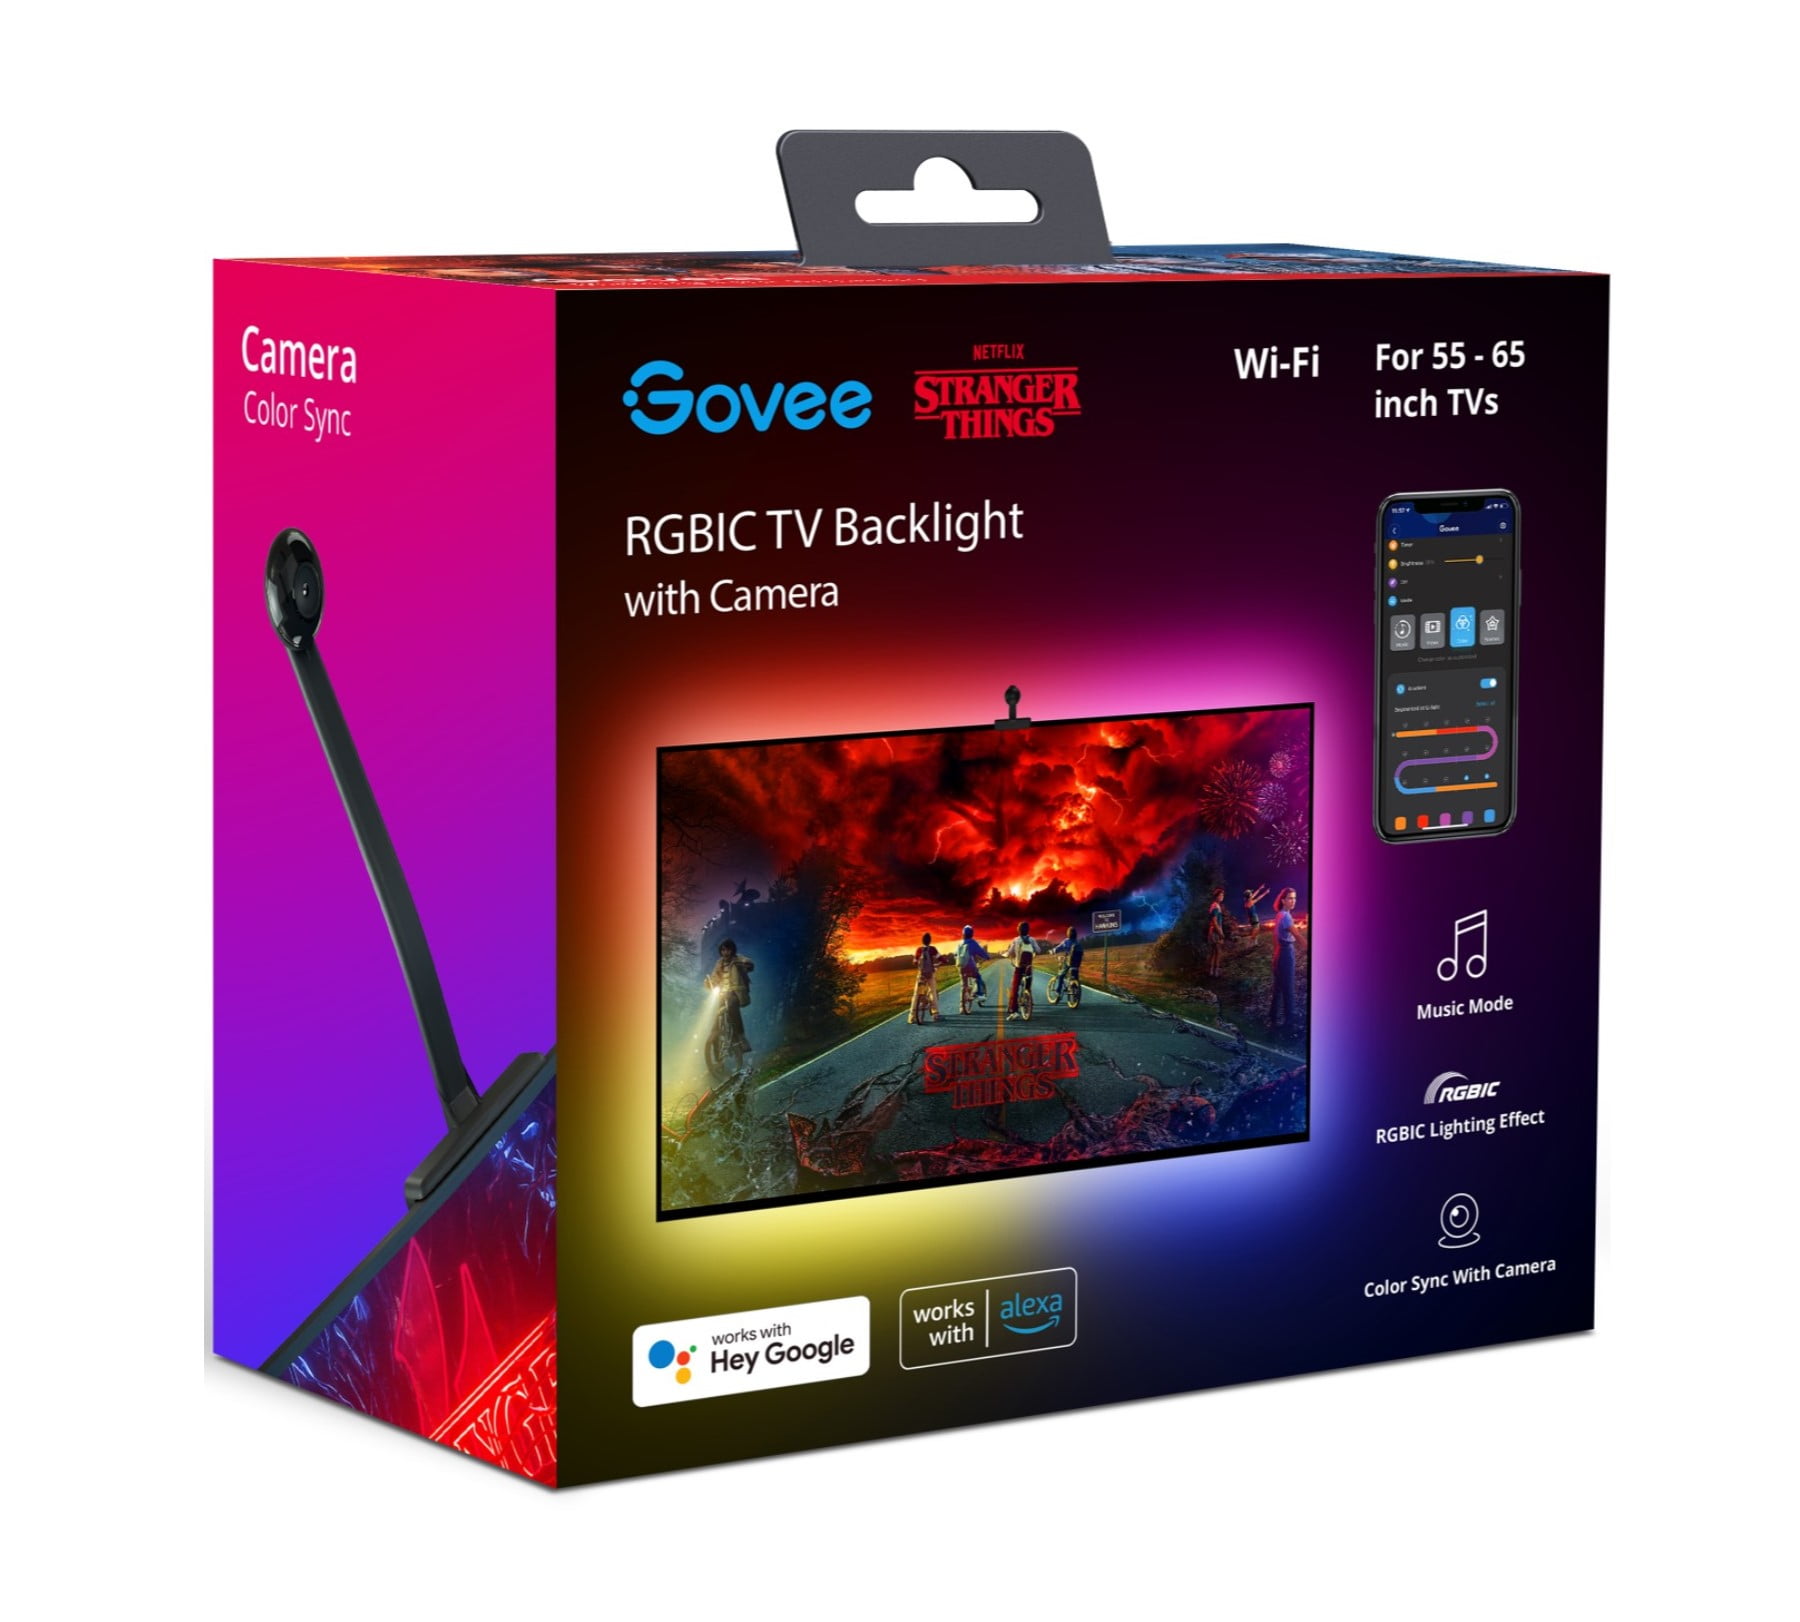 Govee Stranger Things indoor RGBIC LED TV Backlight with Camera 12.5FT for  55-65 inch TVs and PCs 